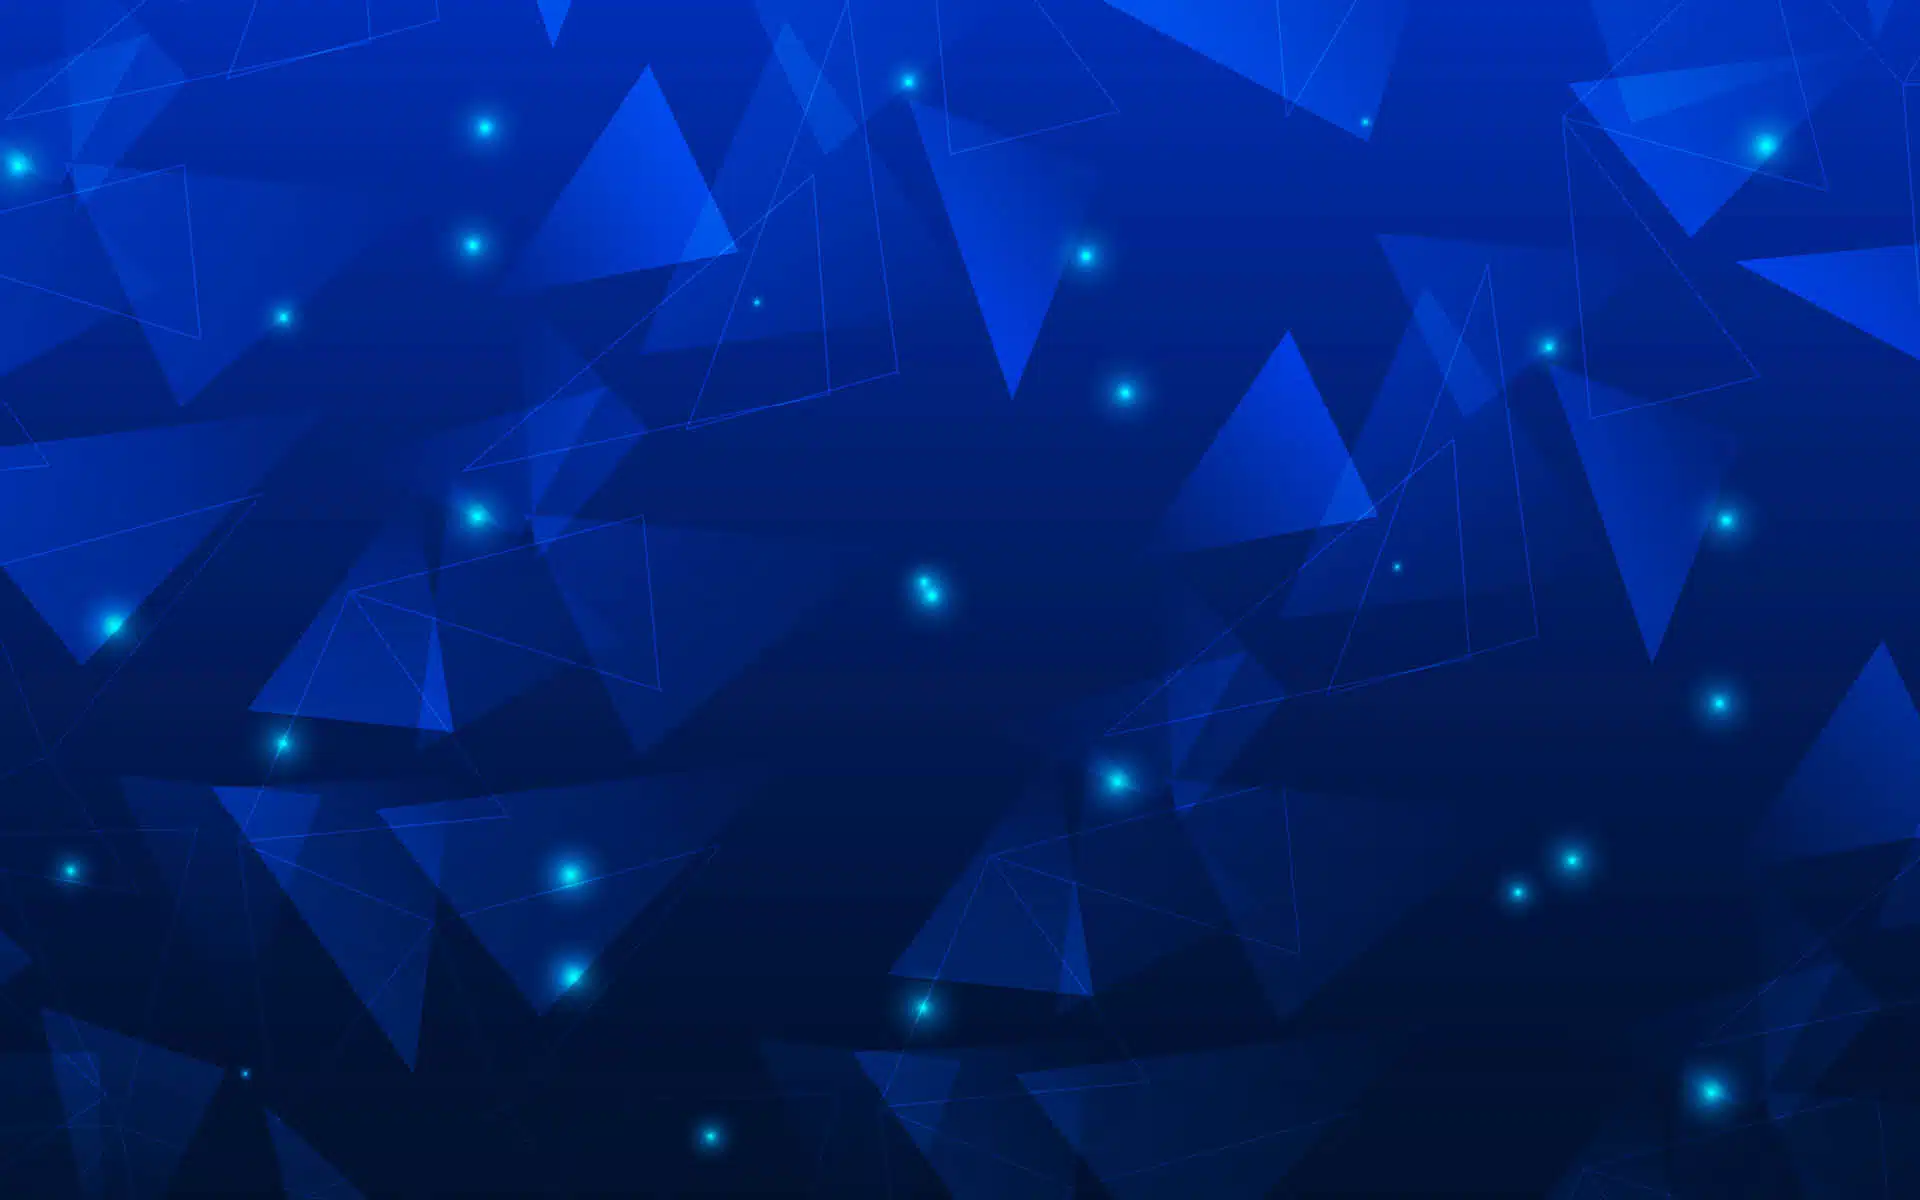 A pattern of blue abstract triangles on a dark background